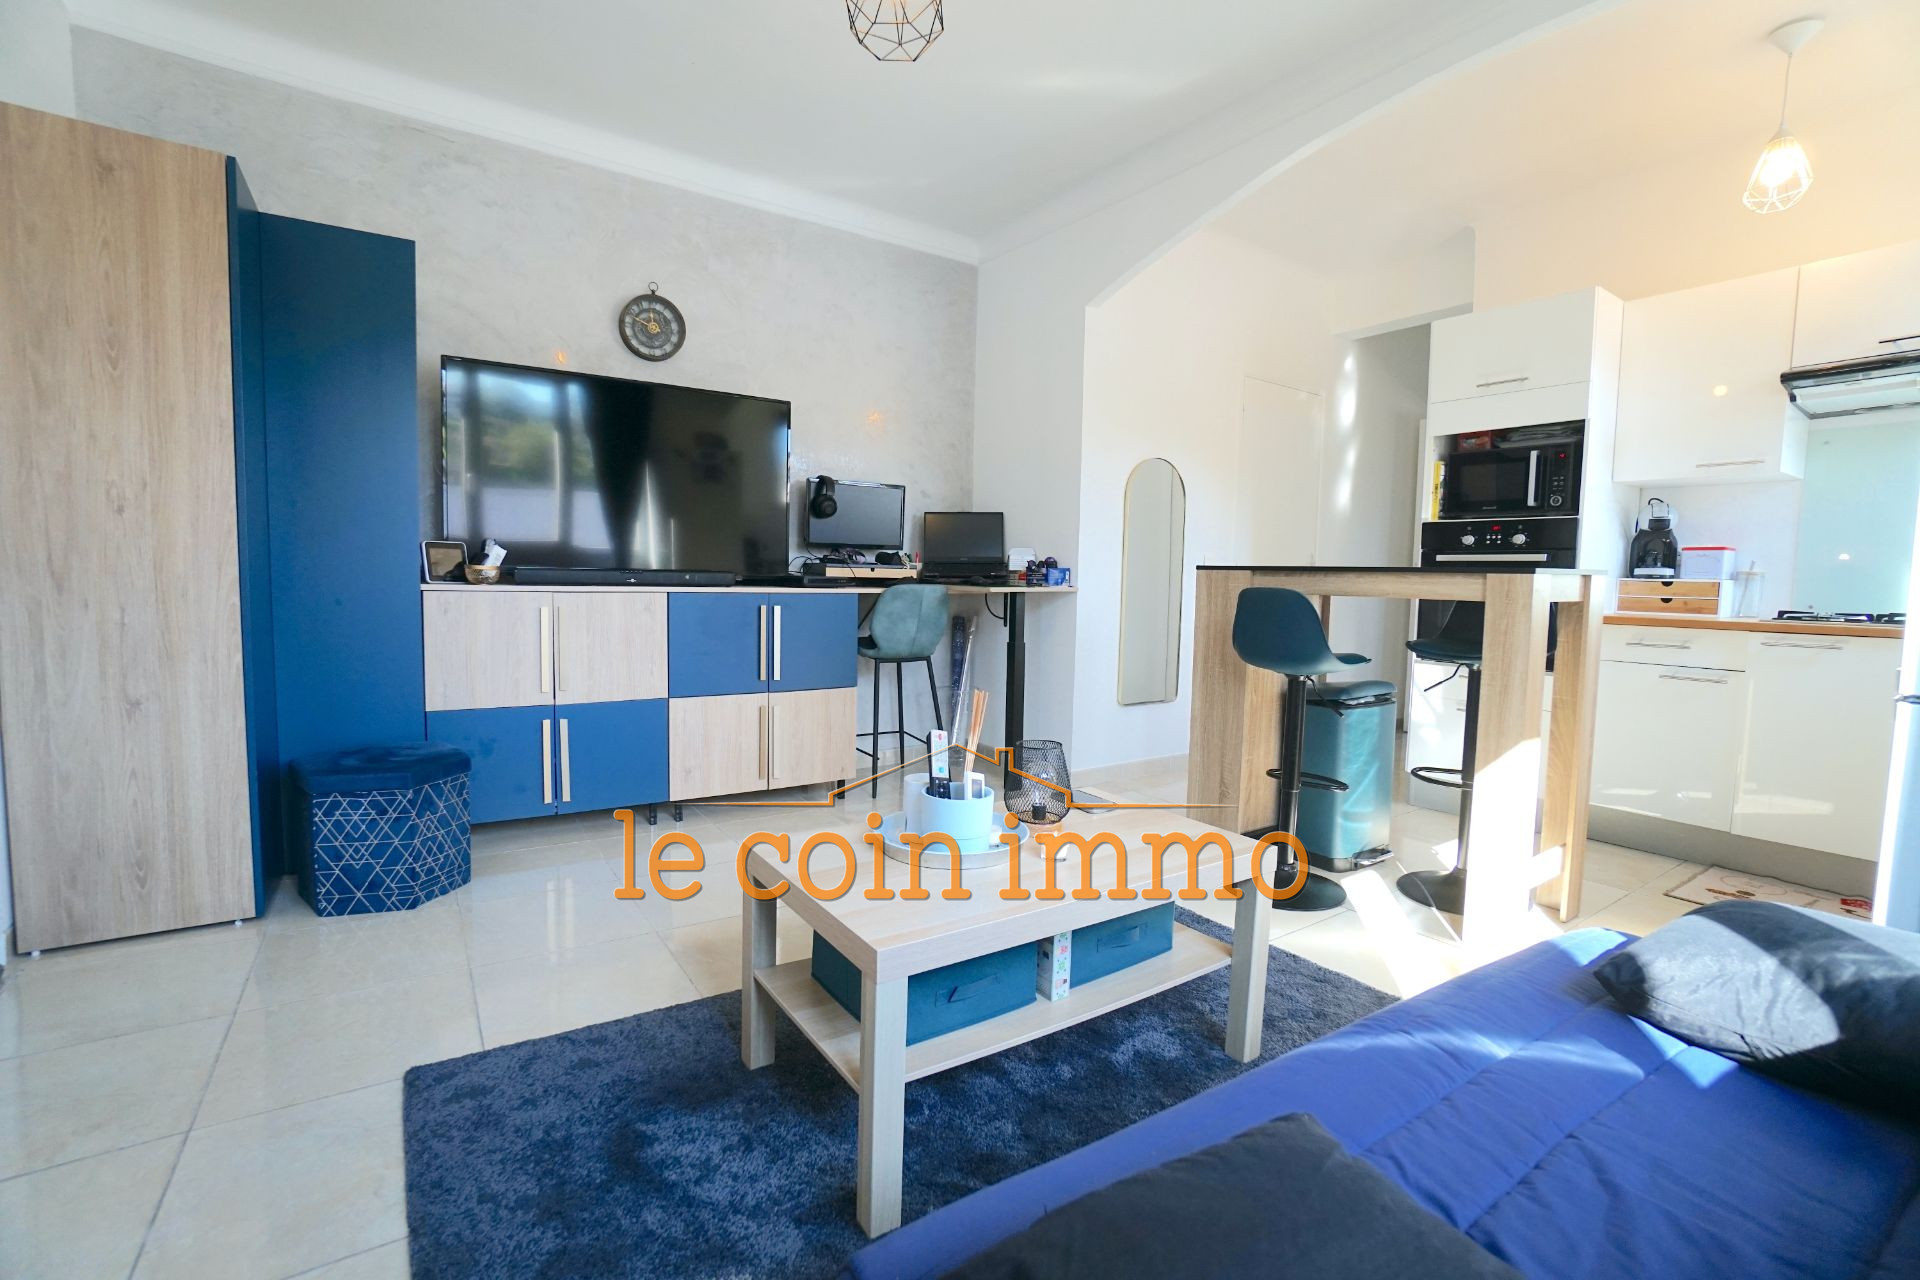 Vente Appartement 36m² à Antibes (06600) - Le Coin Immo